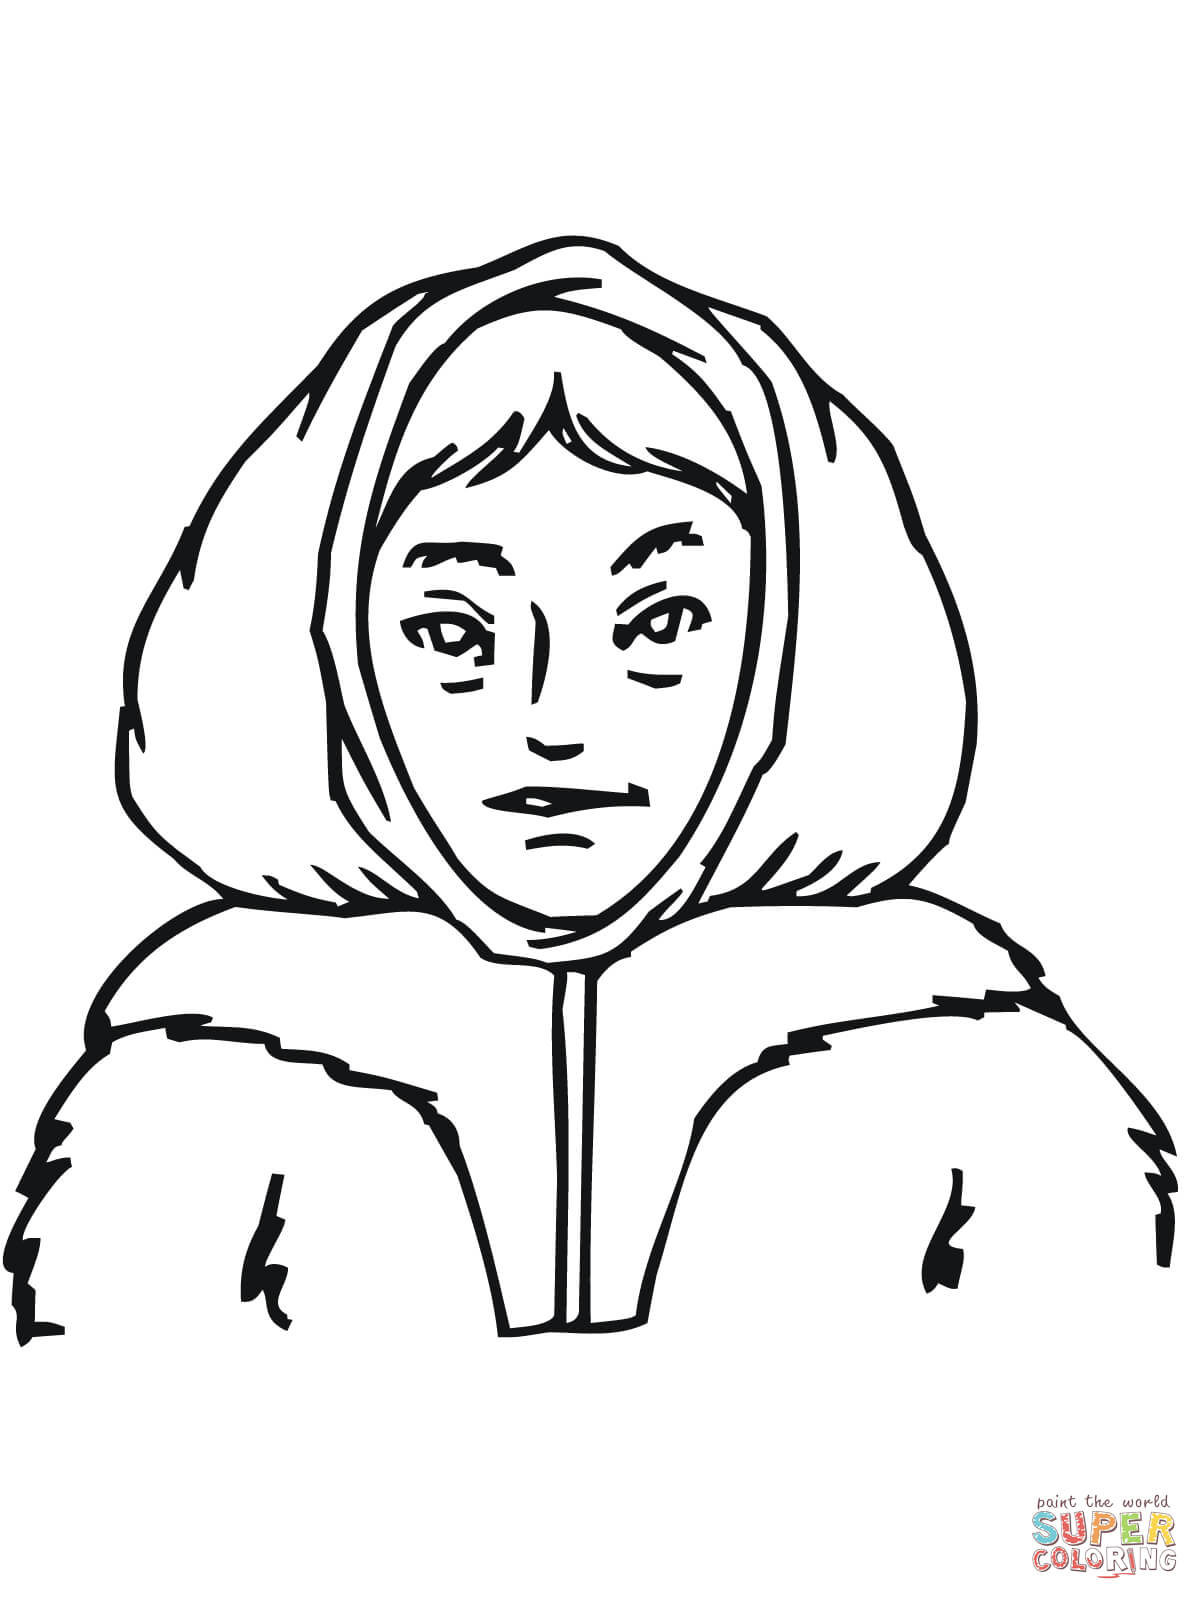 Inuit Coloring Pages Inuit Girl Coloring Page Free Printable Coloring Pages